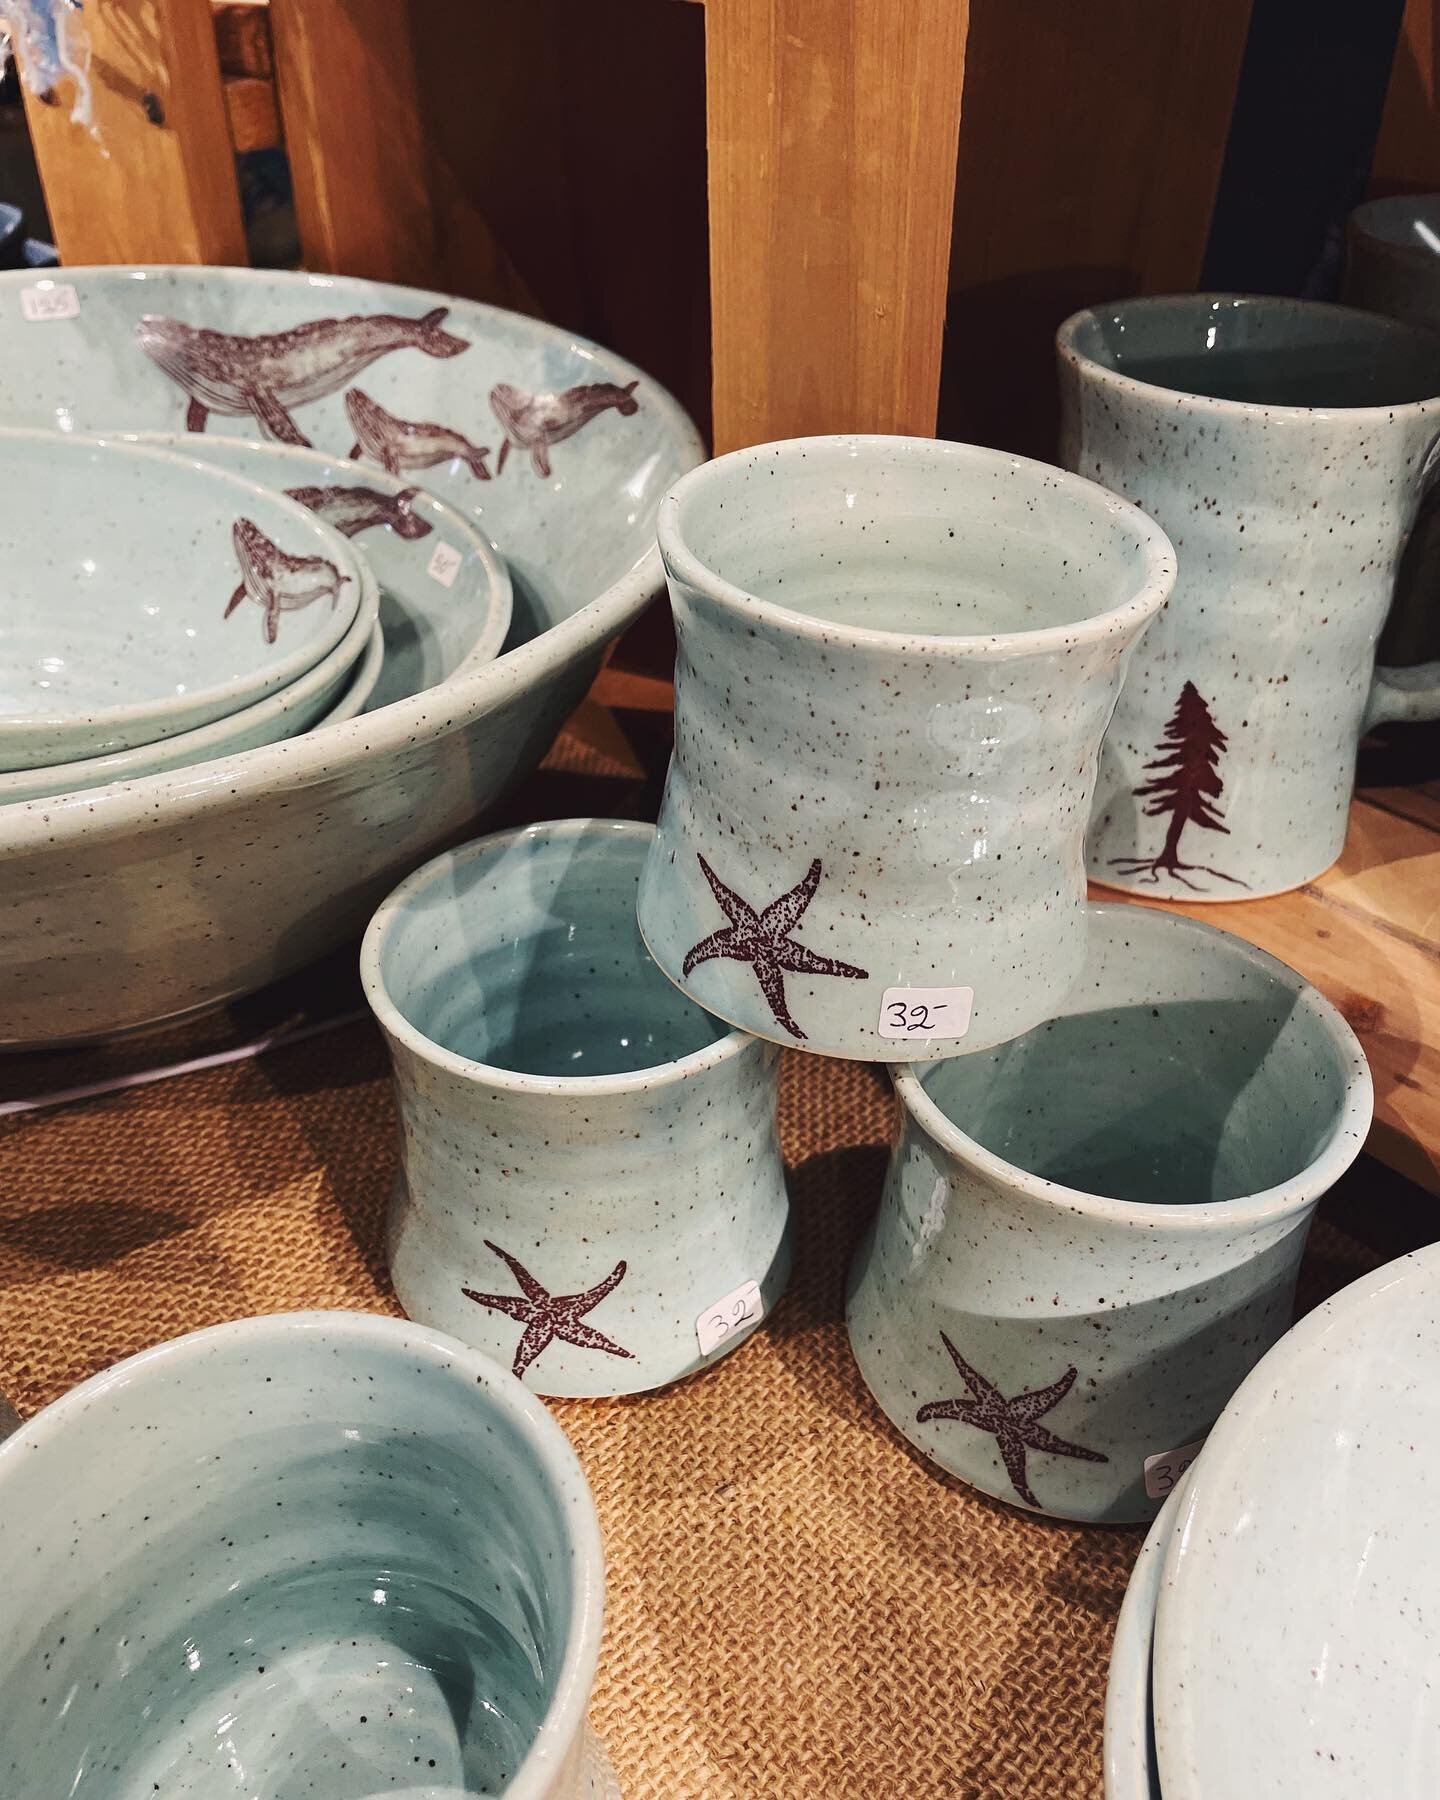 With so much to explore, you may be &ldquo;sea-ing stars&rdquo; 😅. (Sorry for the bad pun, if you can do better please tell us, we won&rsquo;t be blue.)

Open Sunday 10am-5pm!

#halifaxcrafters #halifax #ceramics #beadedearrings #beadwork #madebyhan